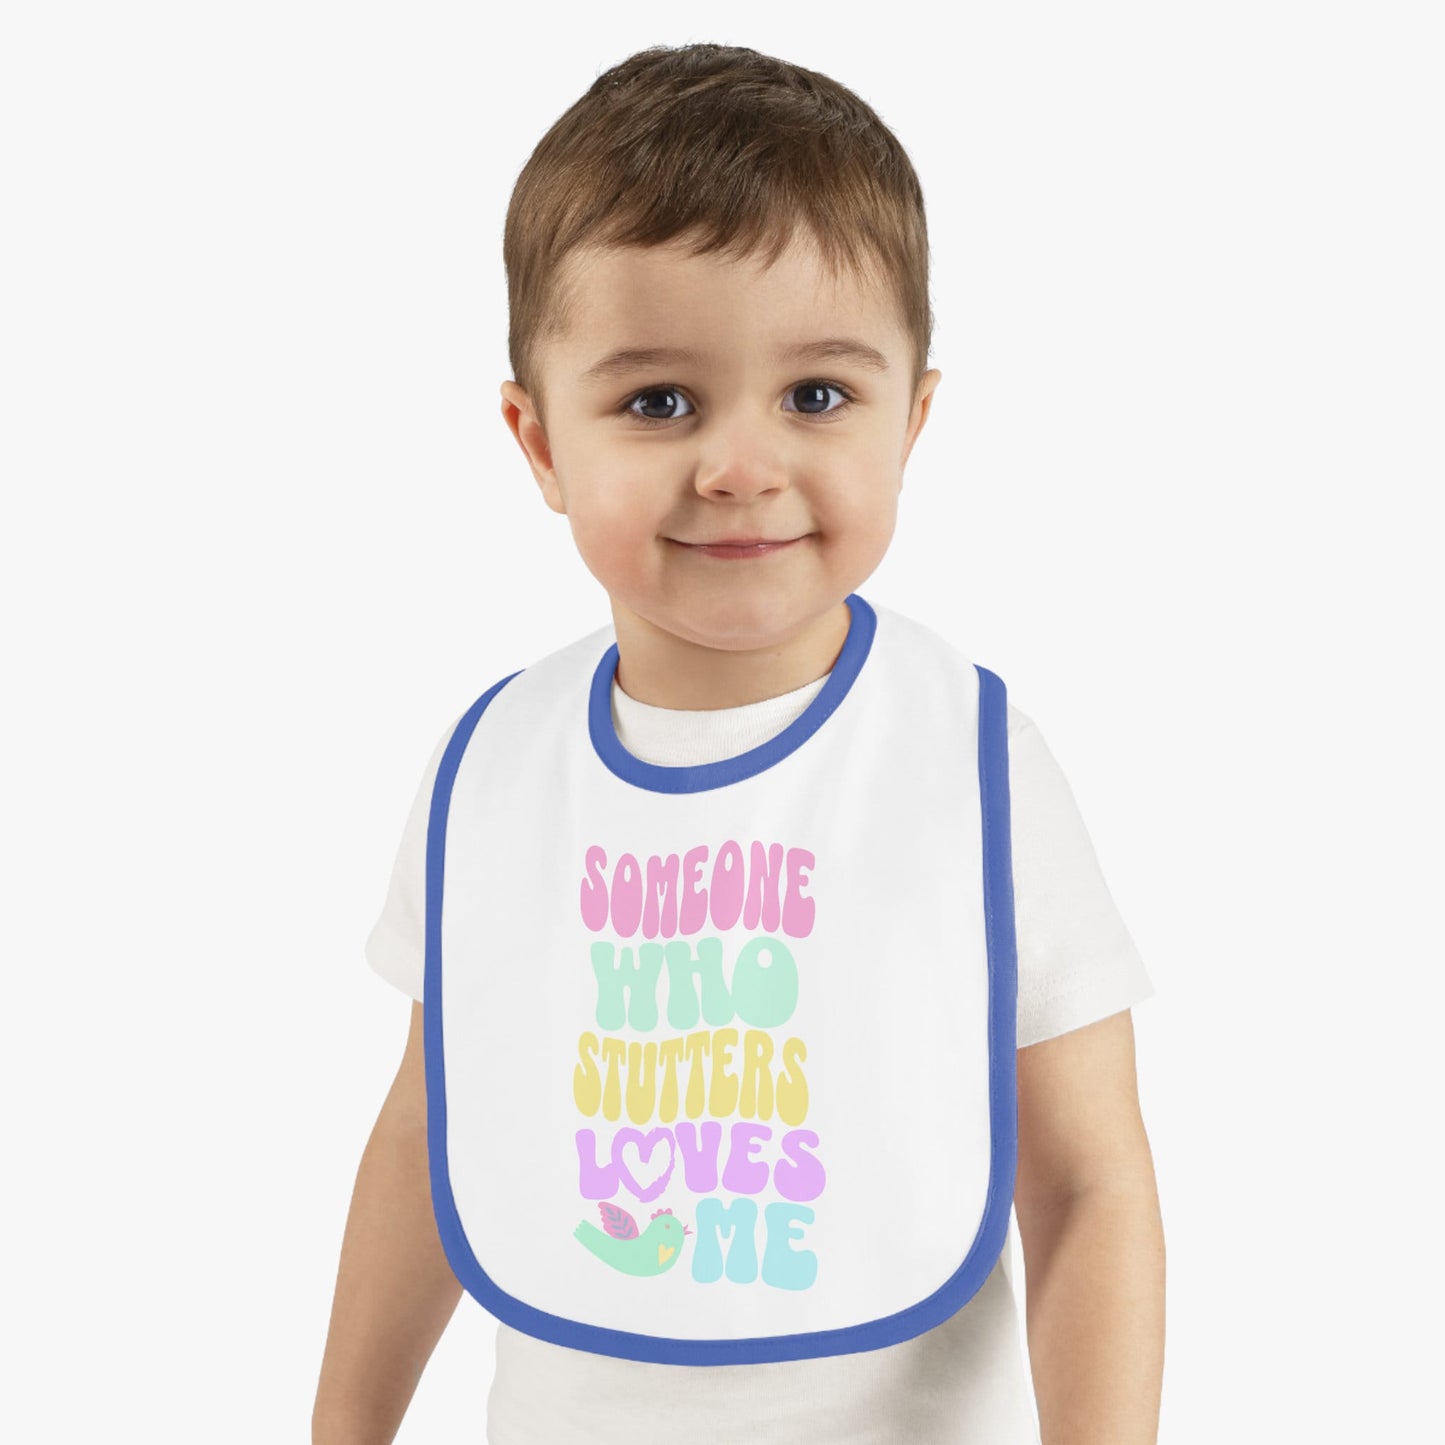 Someone Who Stutters Loves Me Baby Bib